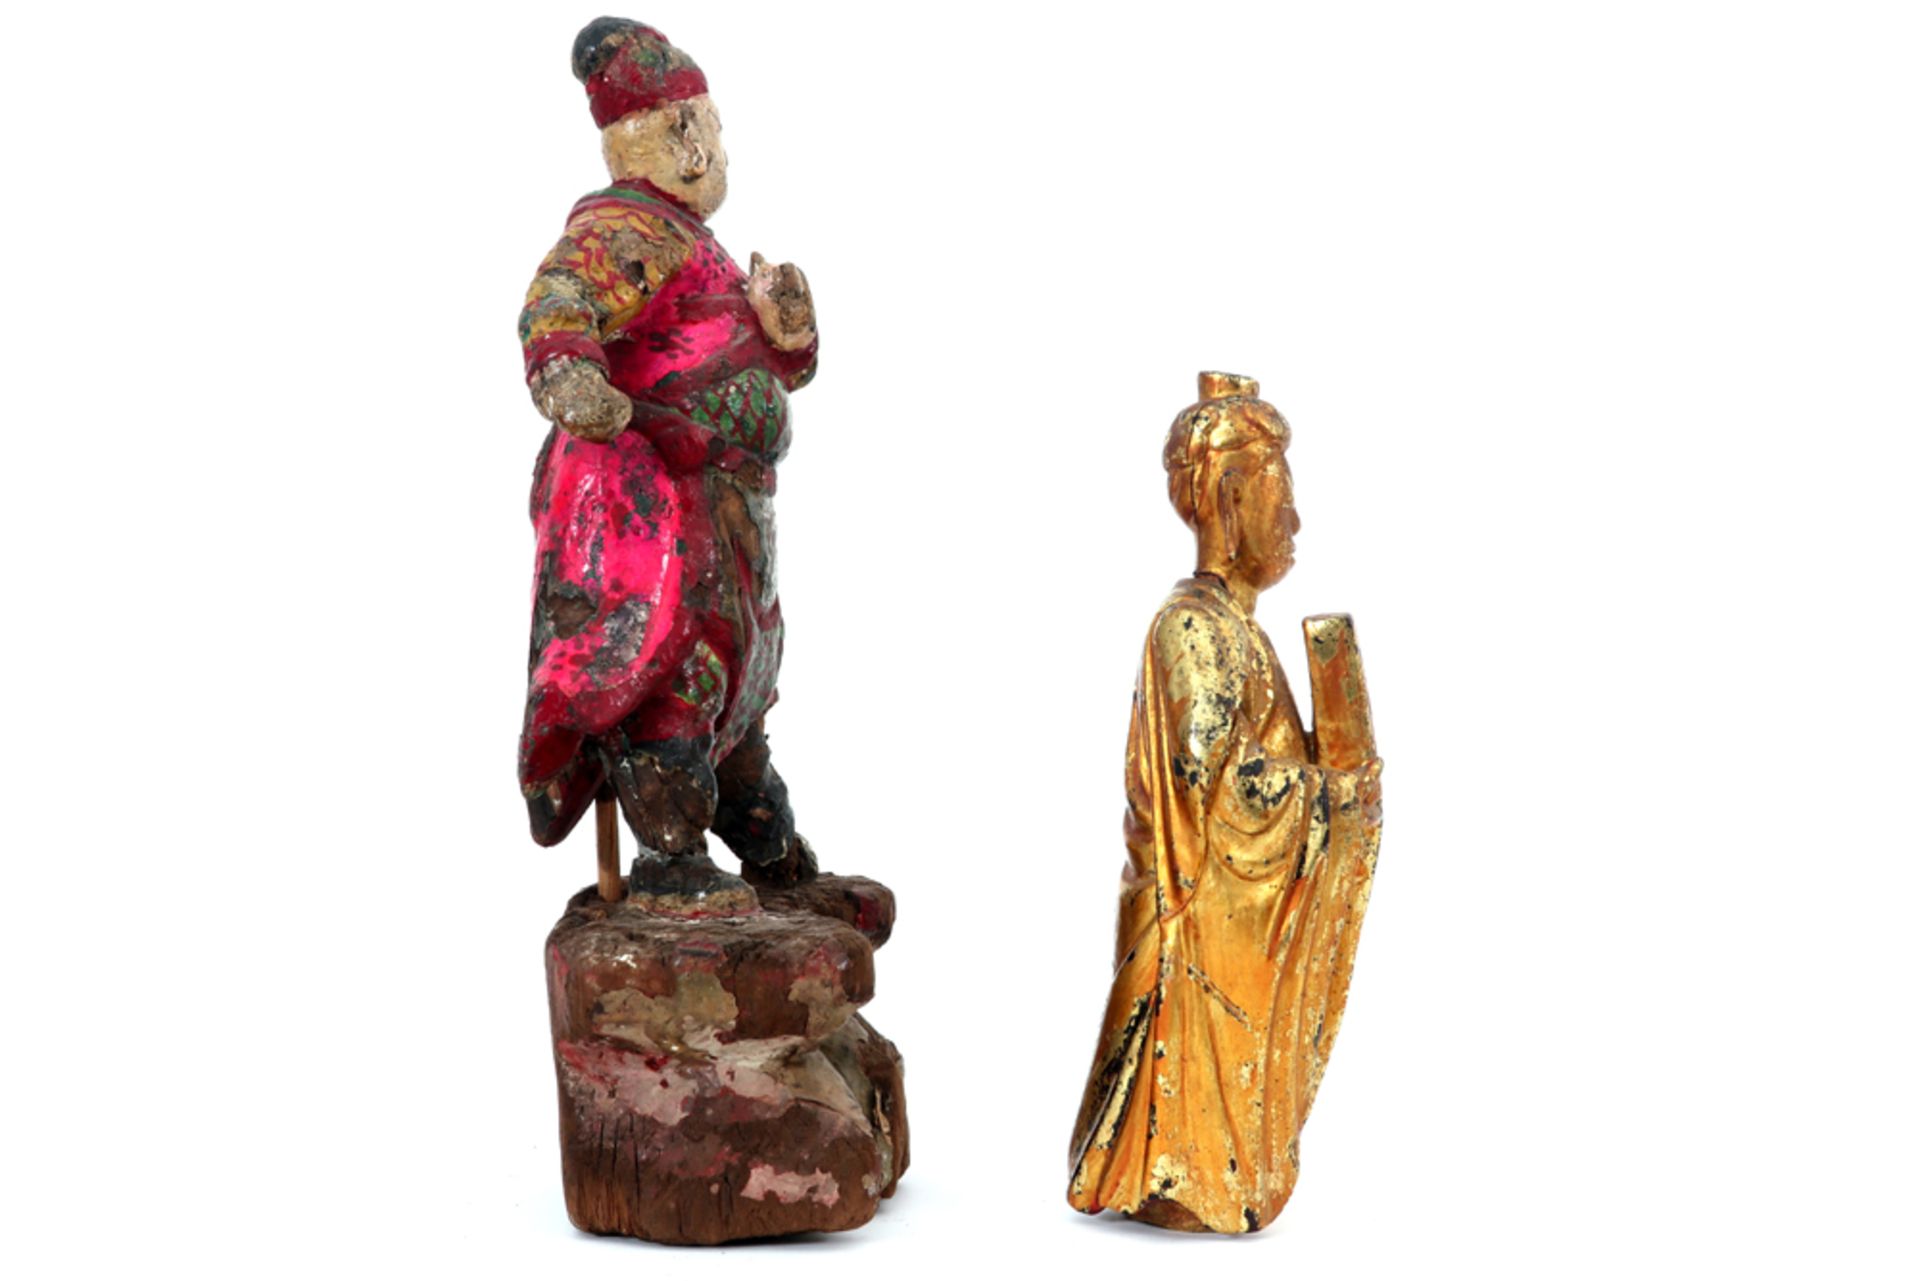 Chinese Ming Dynasty sculpture in wood with painted polychromy sold with a Buddha sculpture in - Bild 3 aus 4